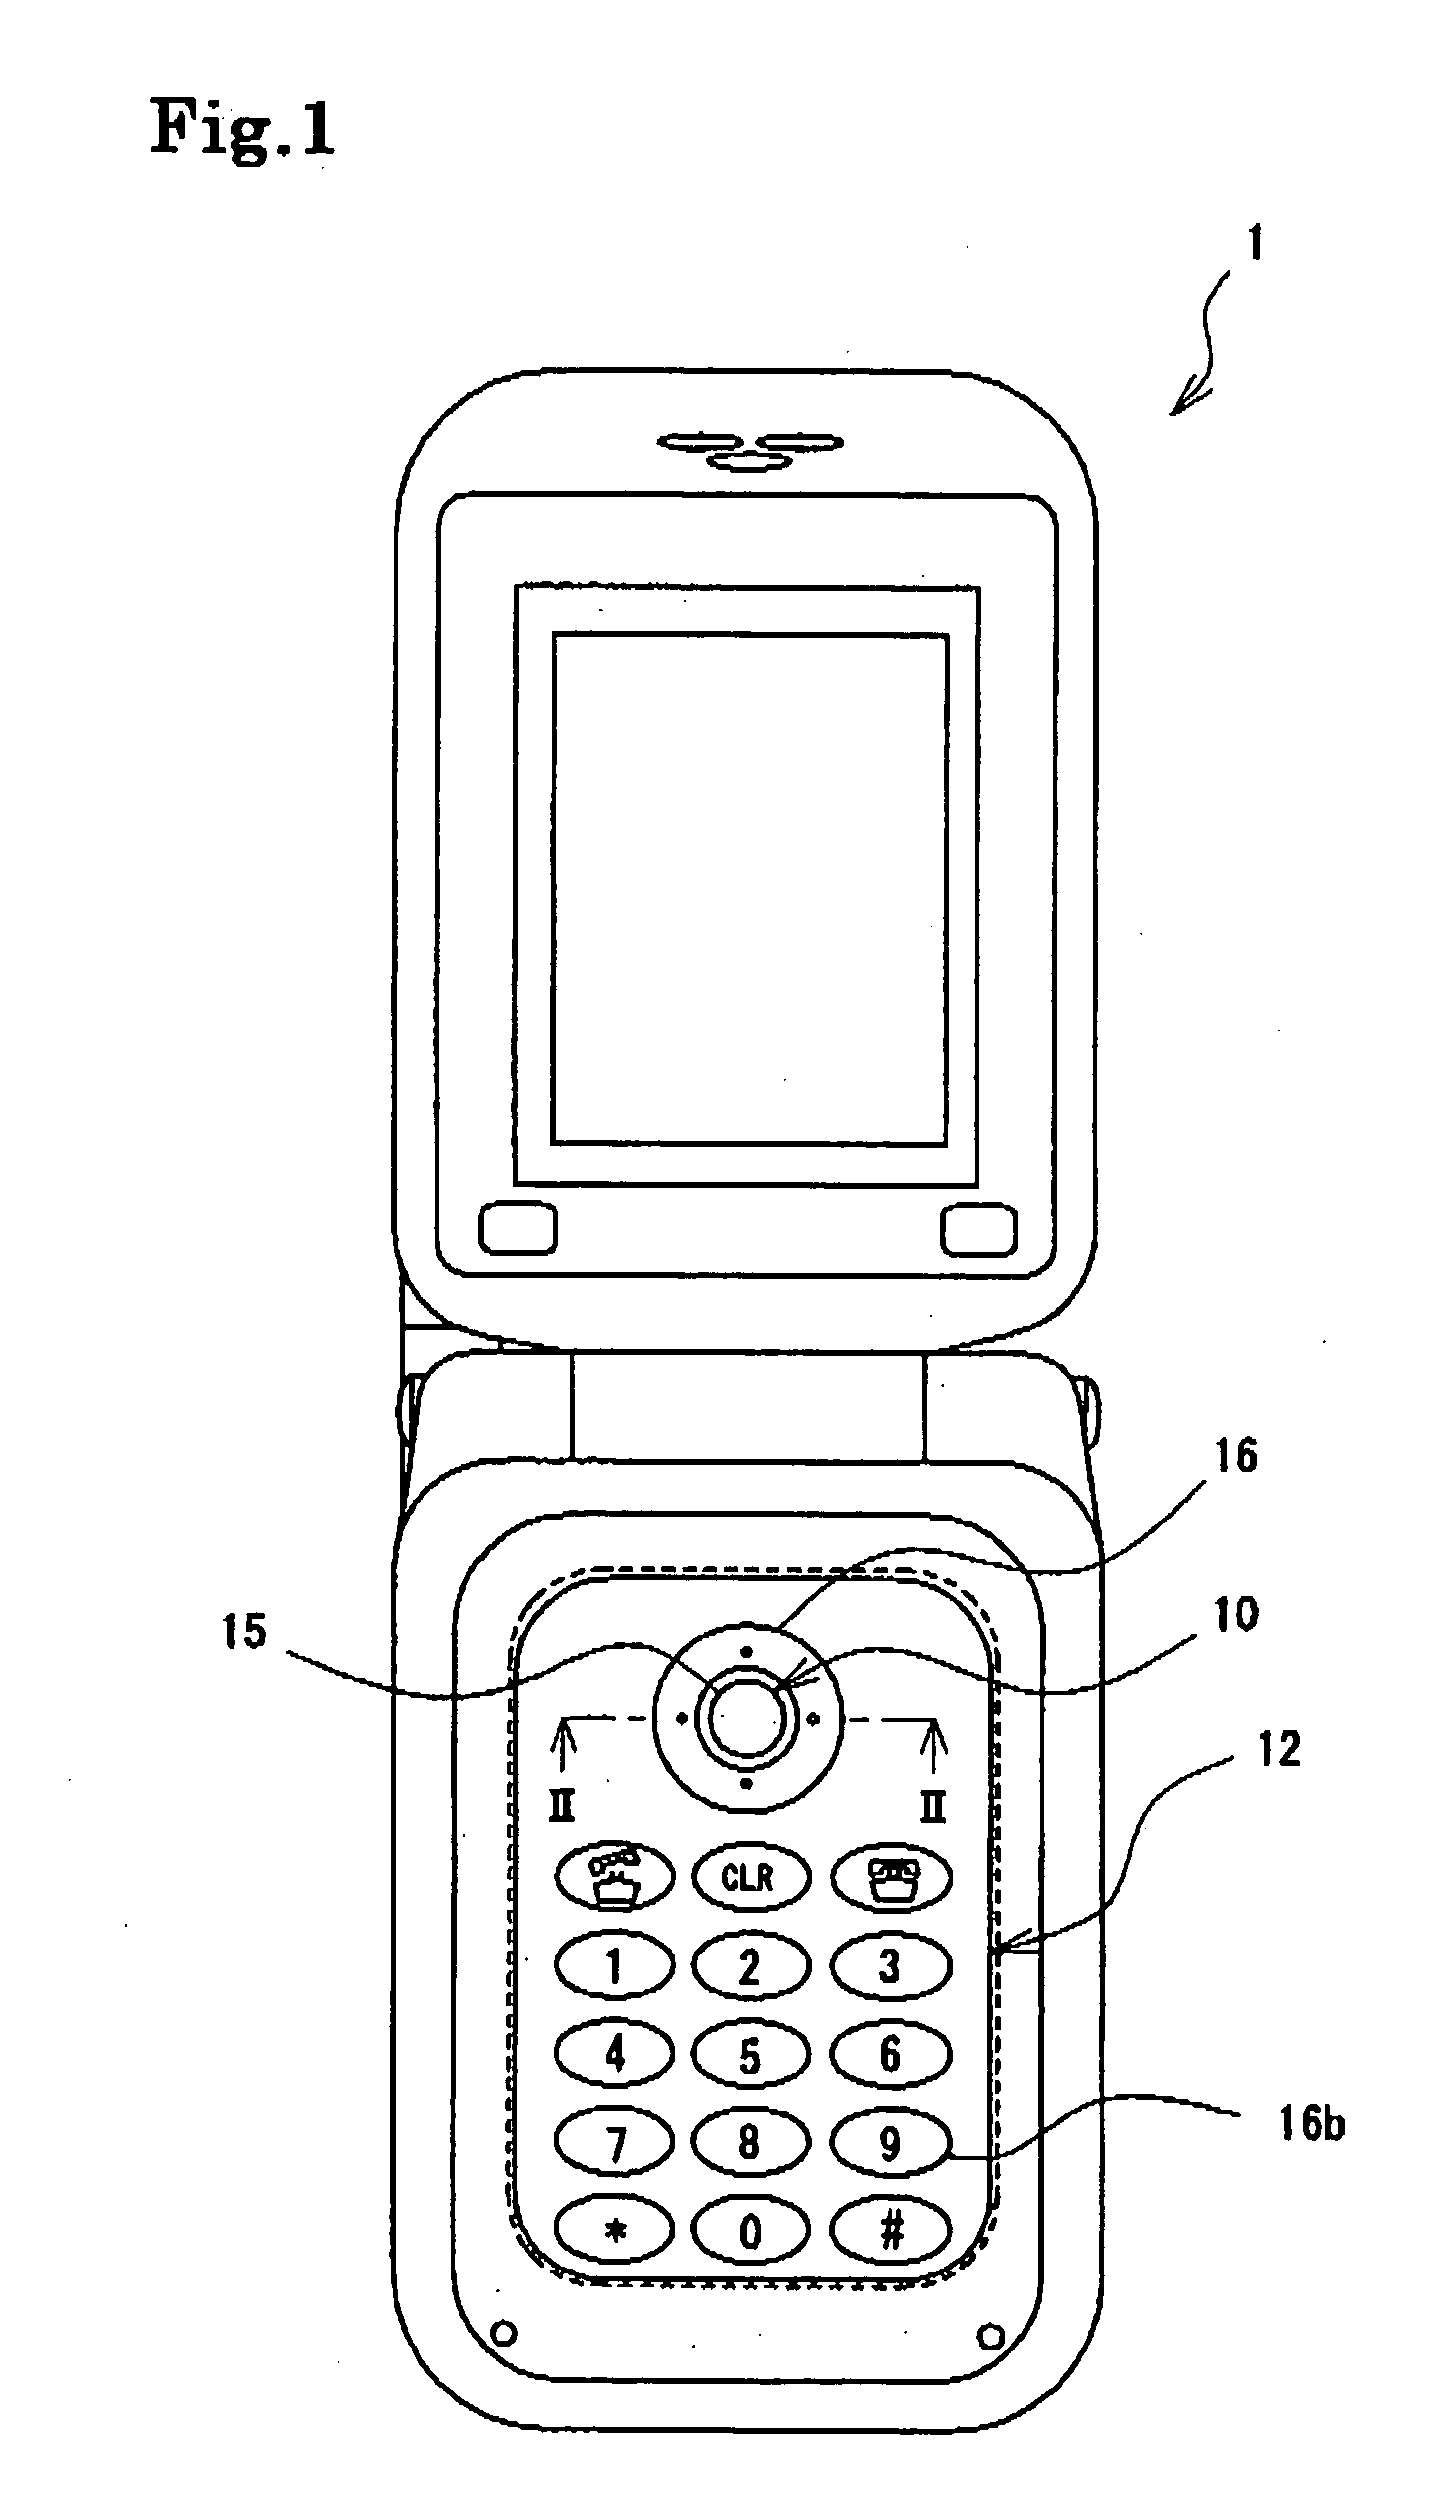 Key sheet for a pointing device and pointing device